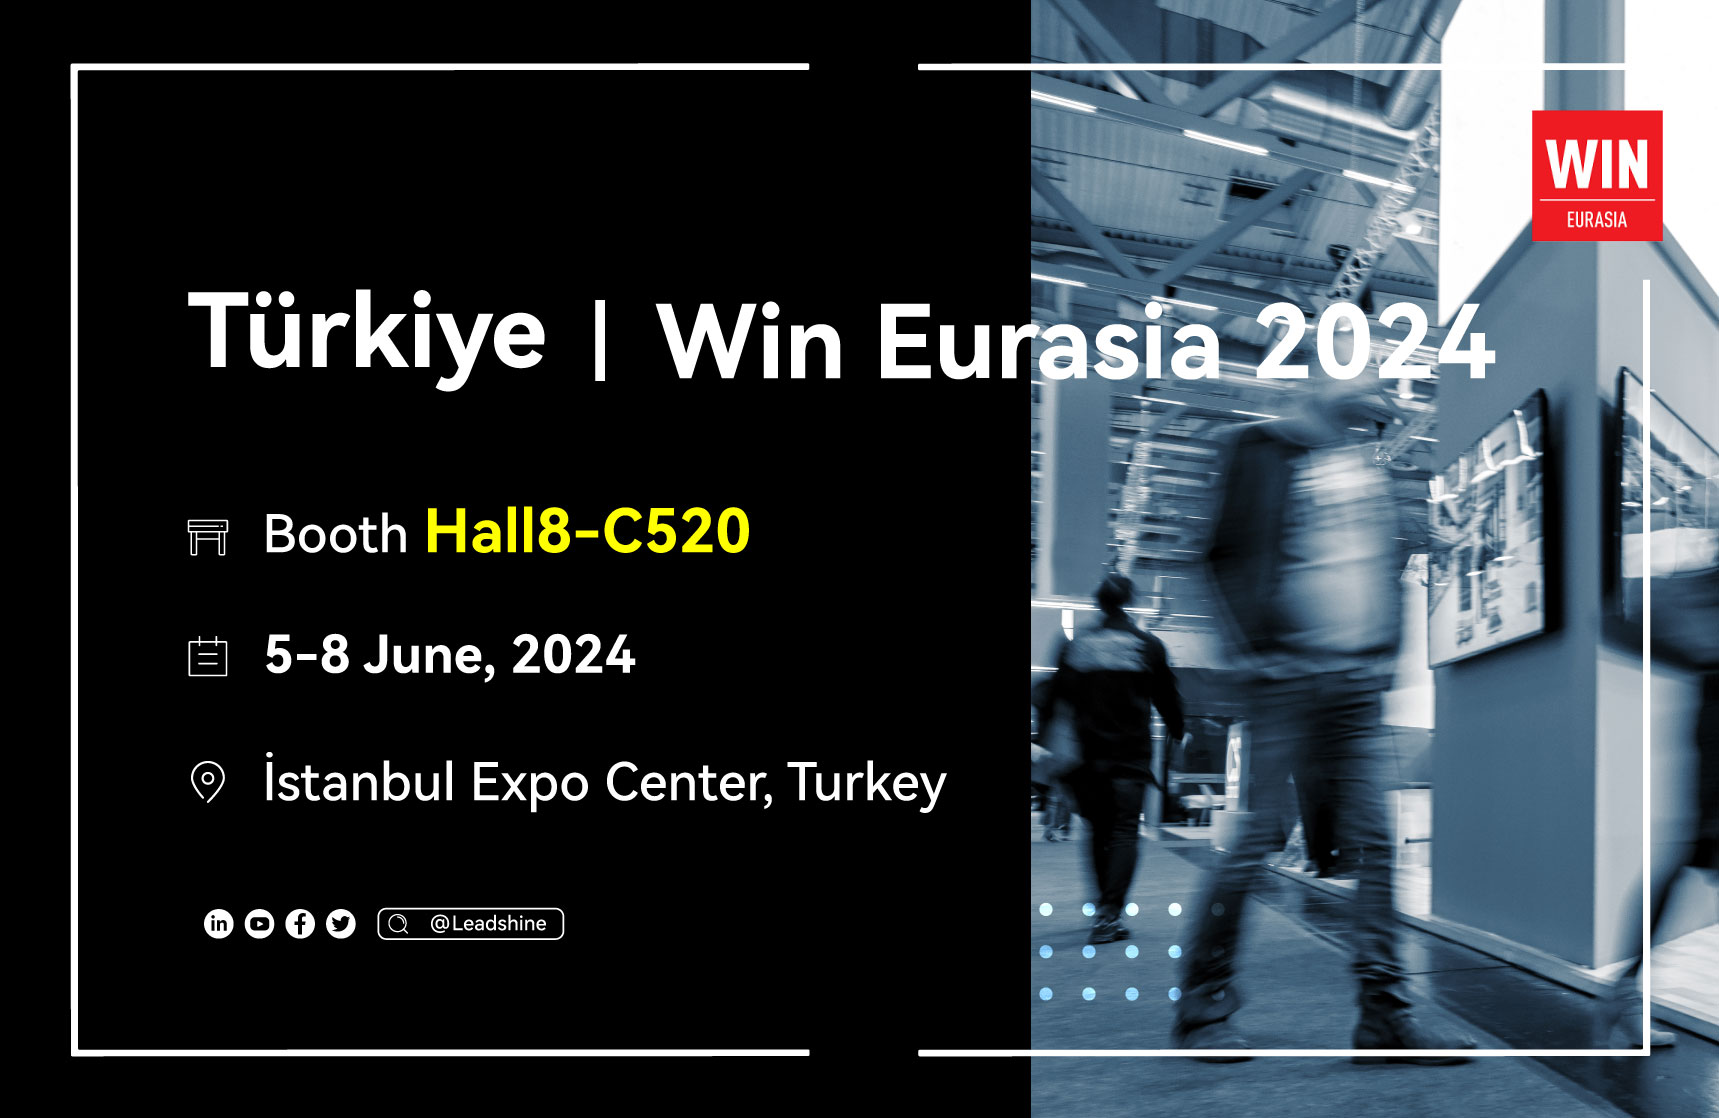 Leadshine attend the WIN EURASIA 2024 in İstanbul, Turkey